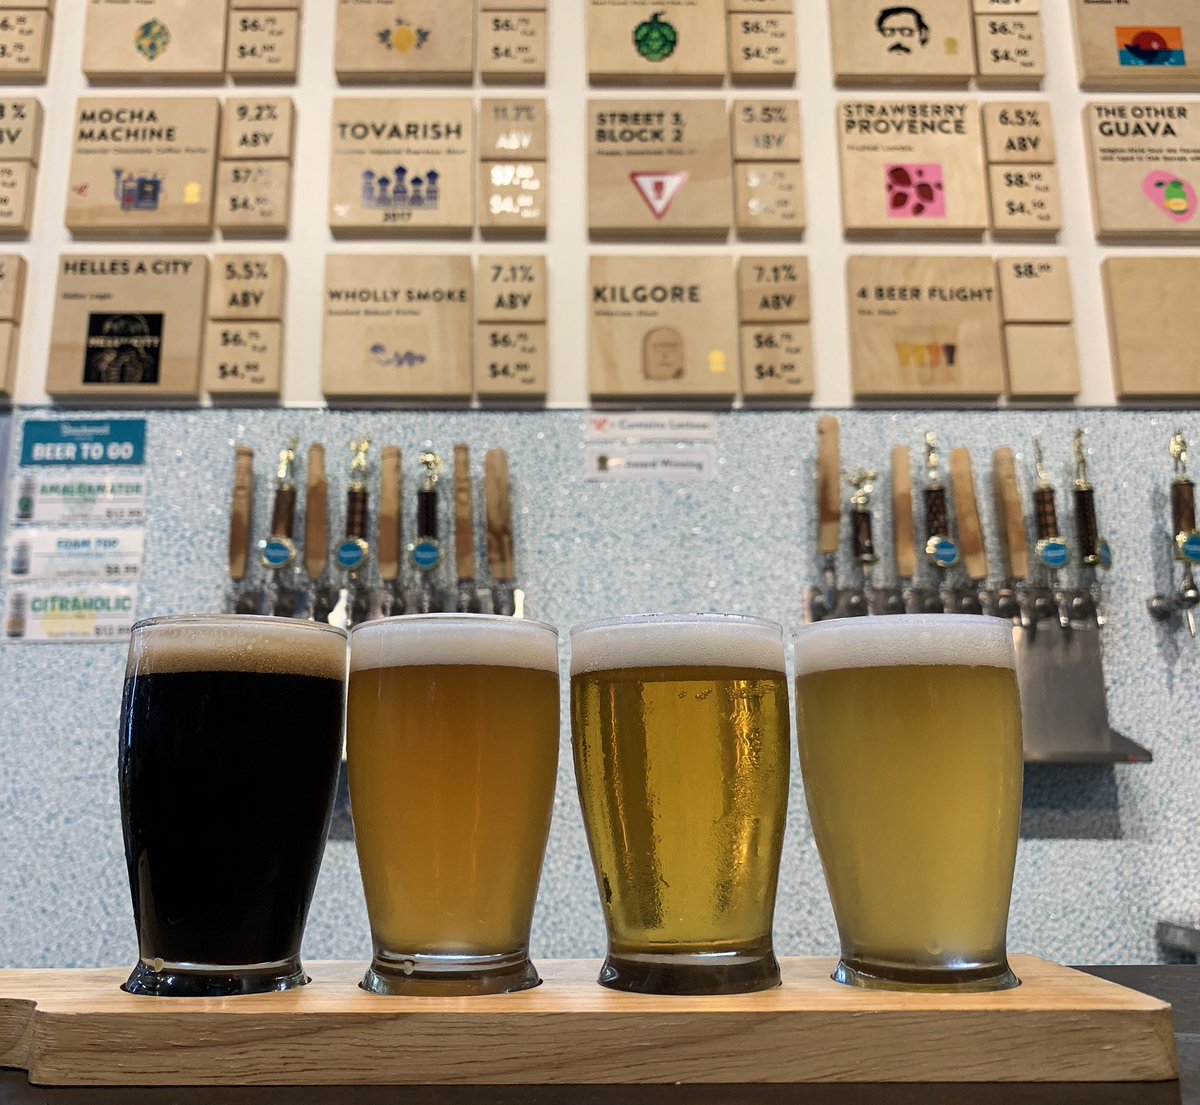 Want to taste your way across the tap wall? Catch some flights! But we suggest you schedule a few layovers if you plan to make the trip. Our HB taproom is open today from 5-9pm! 🛫🍺 #CatchingFlights #OpenToday #BeerFlight #HuntingtonBeach #HB #BeachwoodBrewing #TruetoBeer